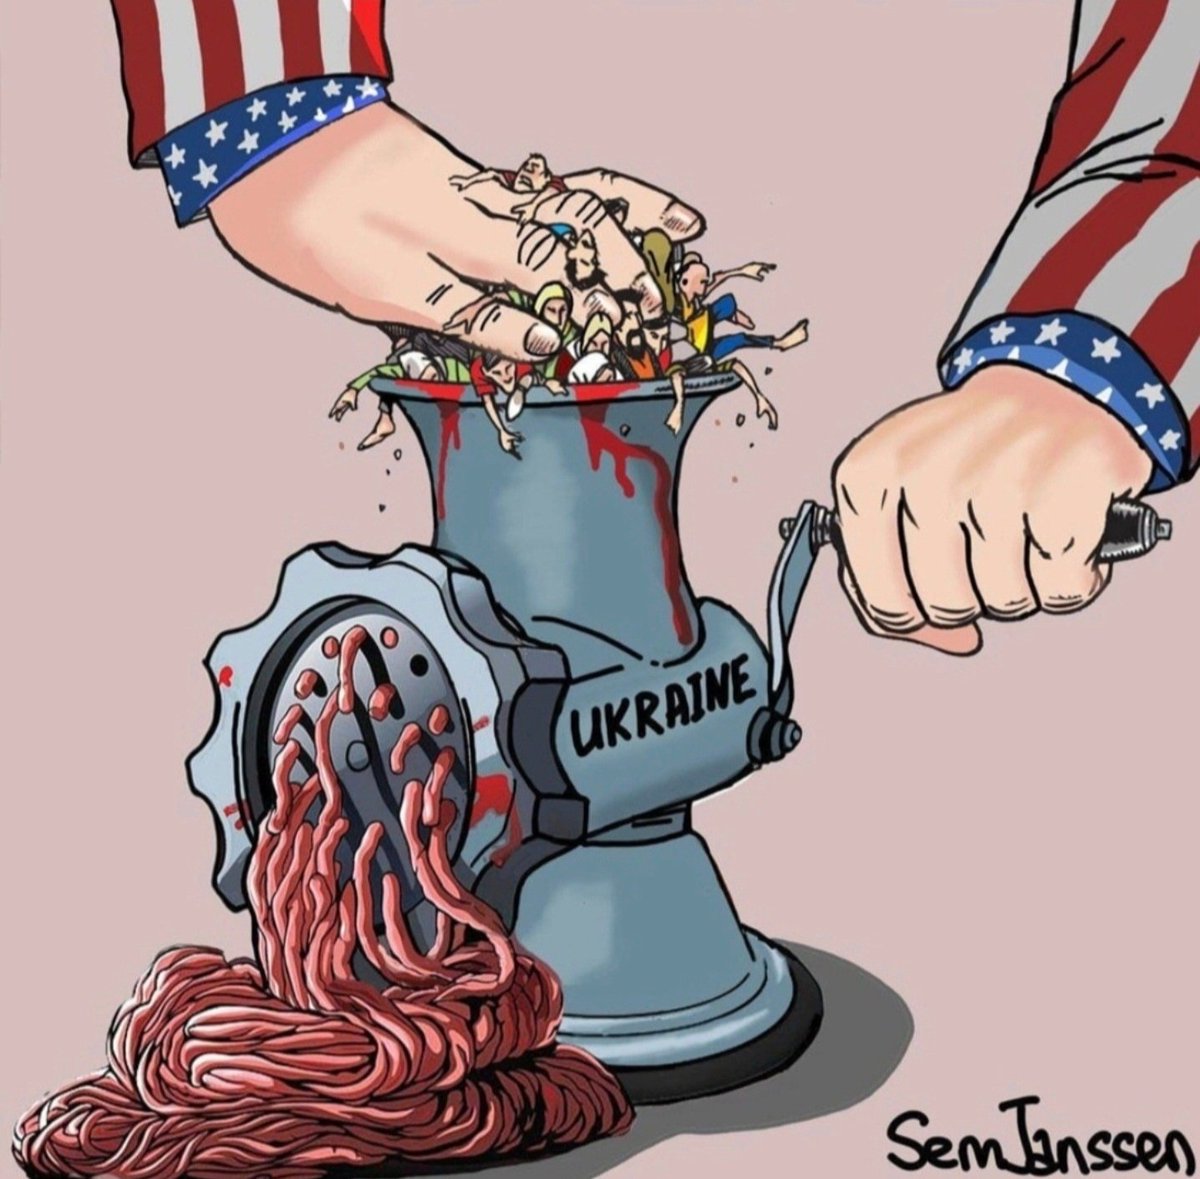 The USA views Ukraine not as a NATO ally, but as cannon fodder or a pawn to be exploited. The US goal is to exhaust Russia through war with Ukraine. Until this goal is achieved, the crisis will continue and Washington will not stop using Kiev for its own purposes....